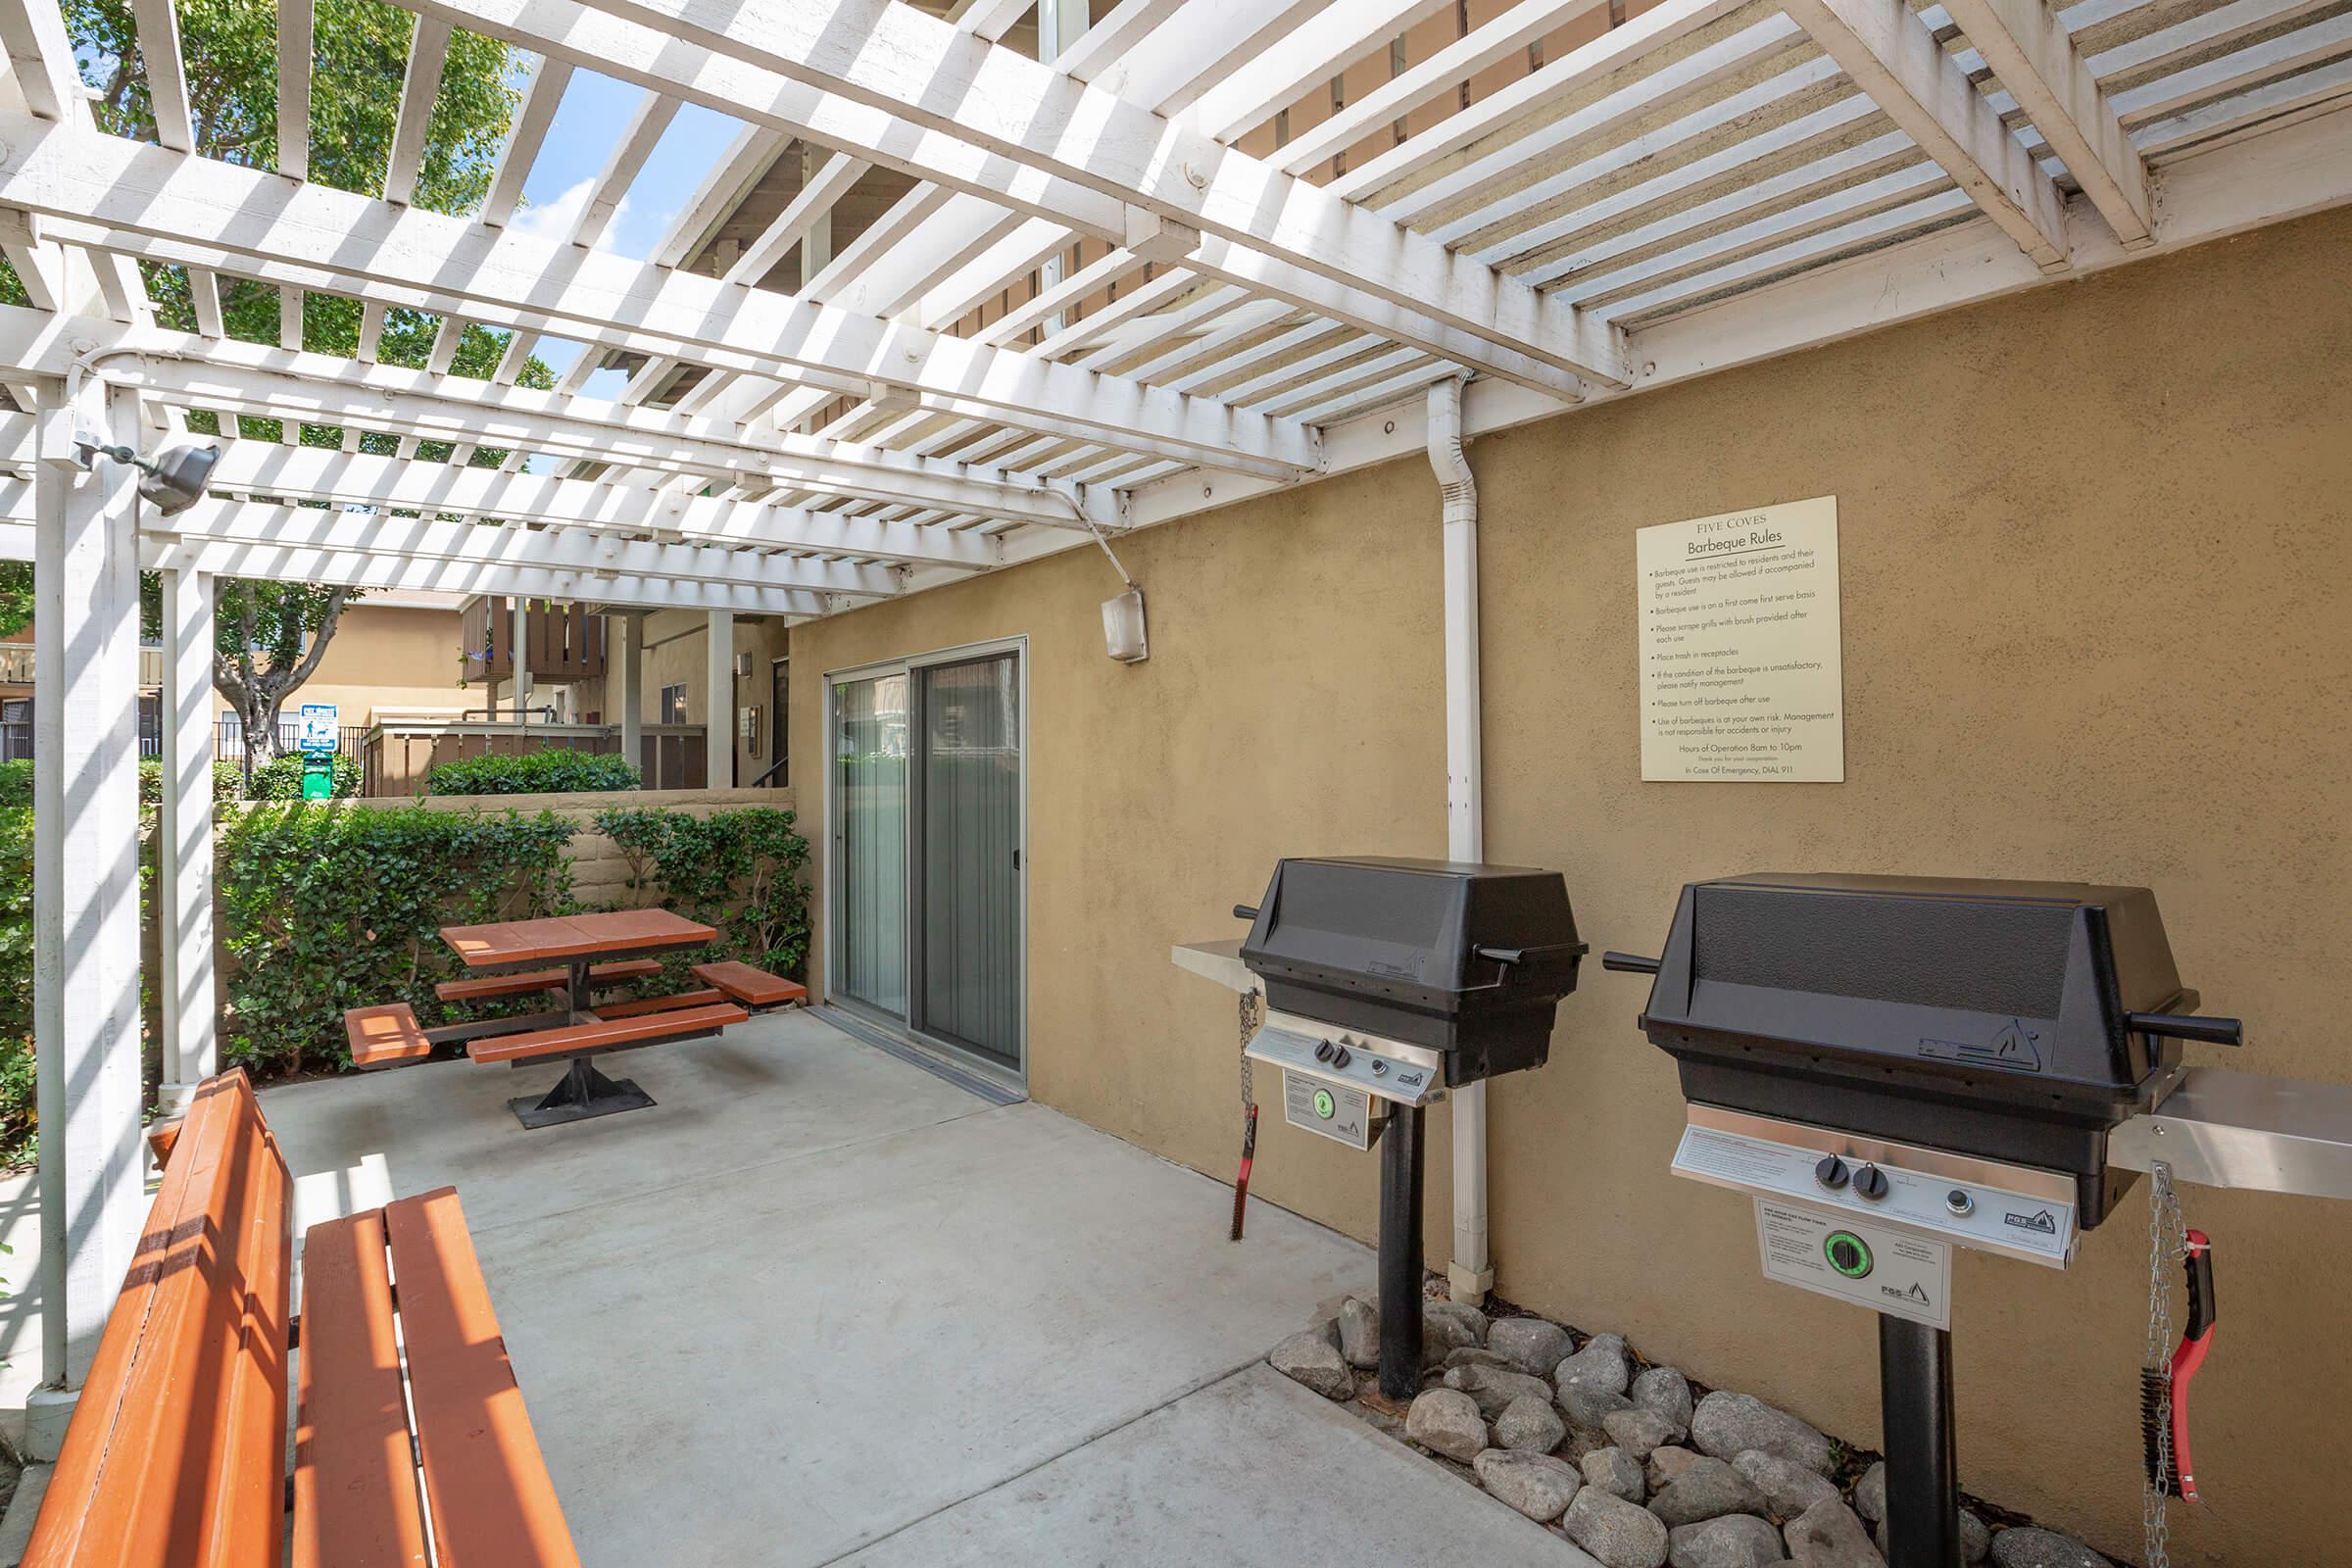 Barbecues and picnic tables under a pergola